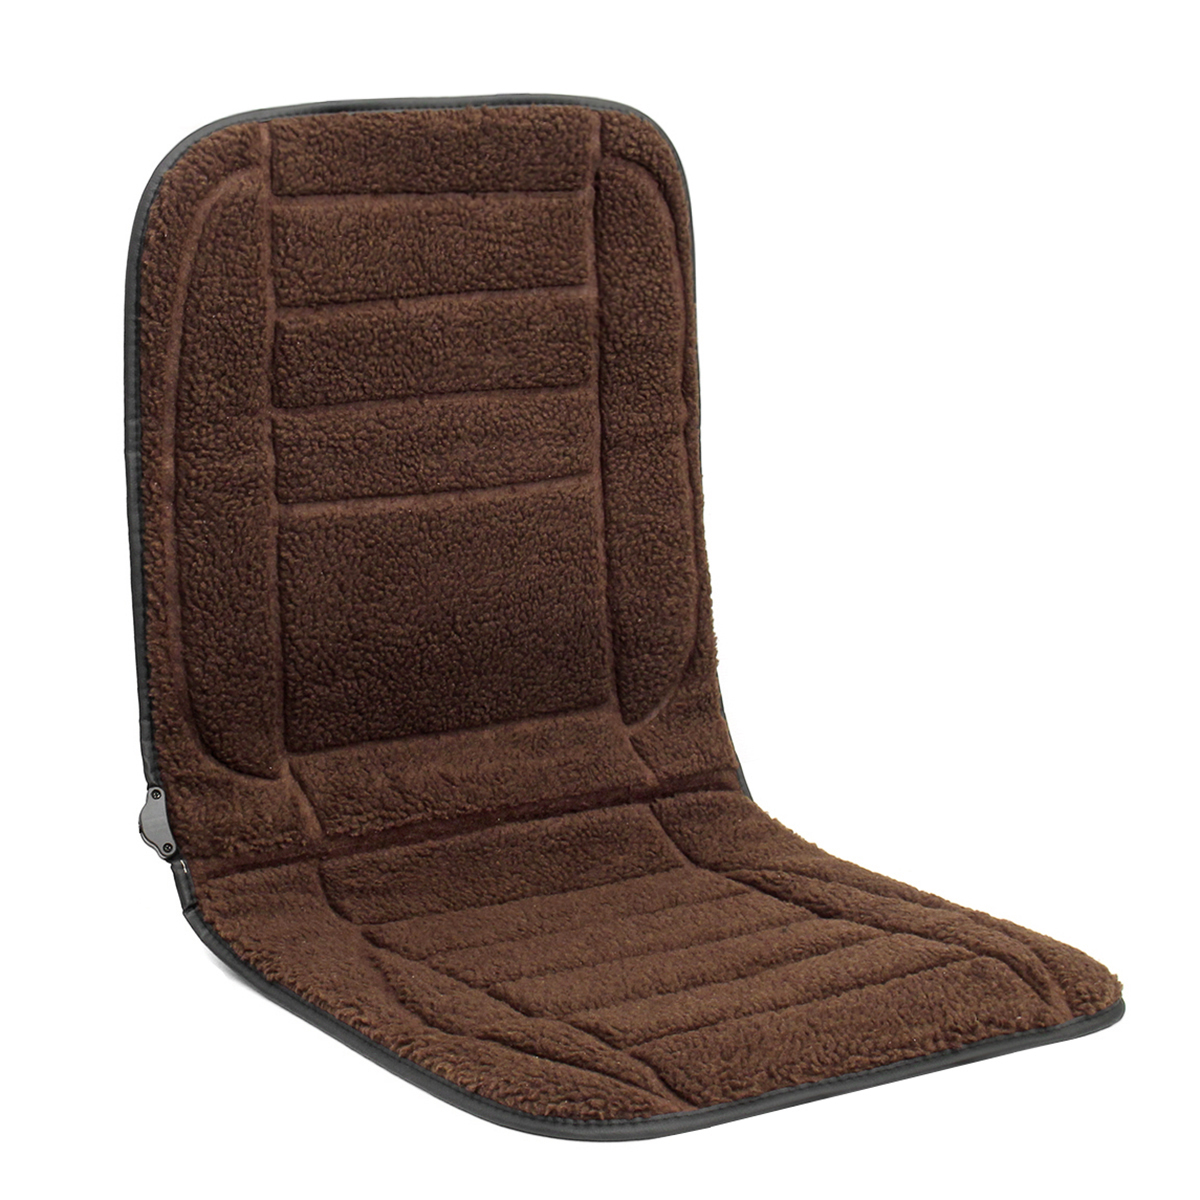 12V-Car-Van-Front-Seat-Heated-Cushion-Seat-Warmer-Winter-Household-Cover-Electric-Heating-Mat-Brown-1386527